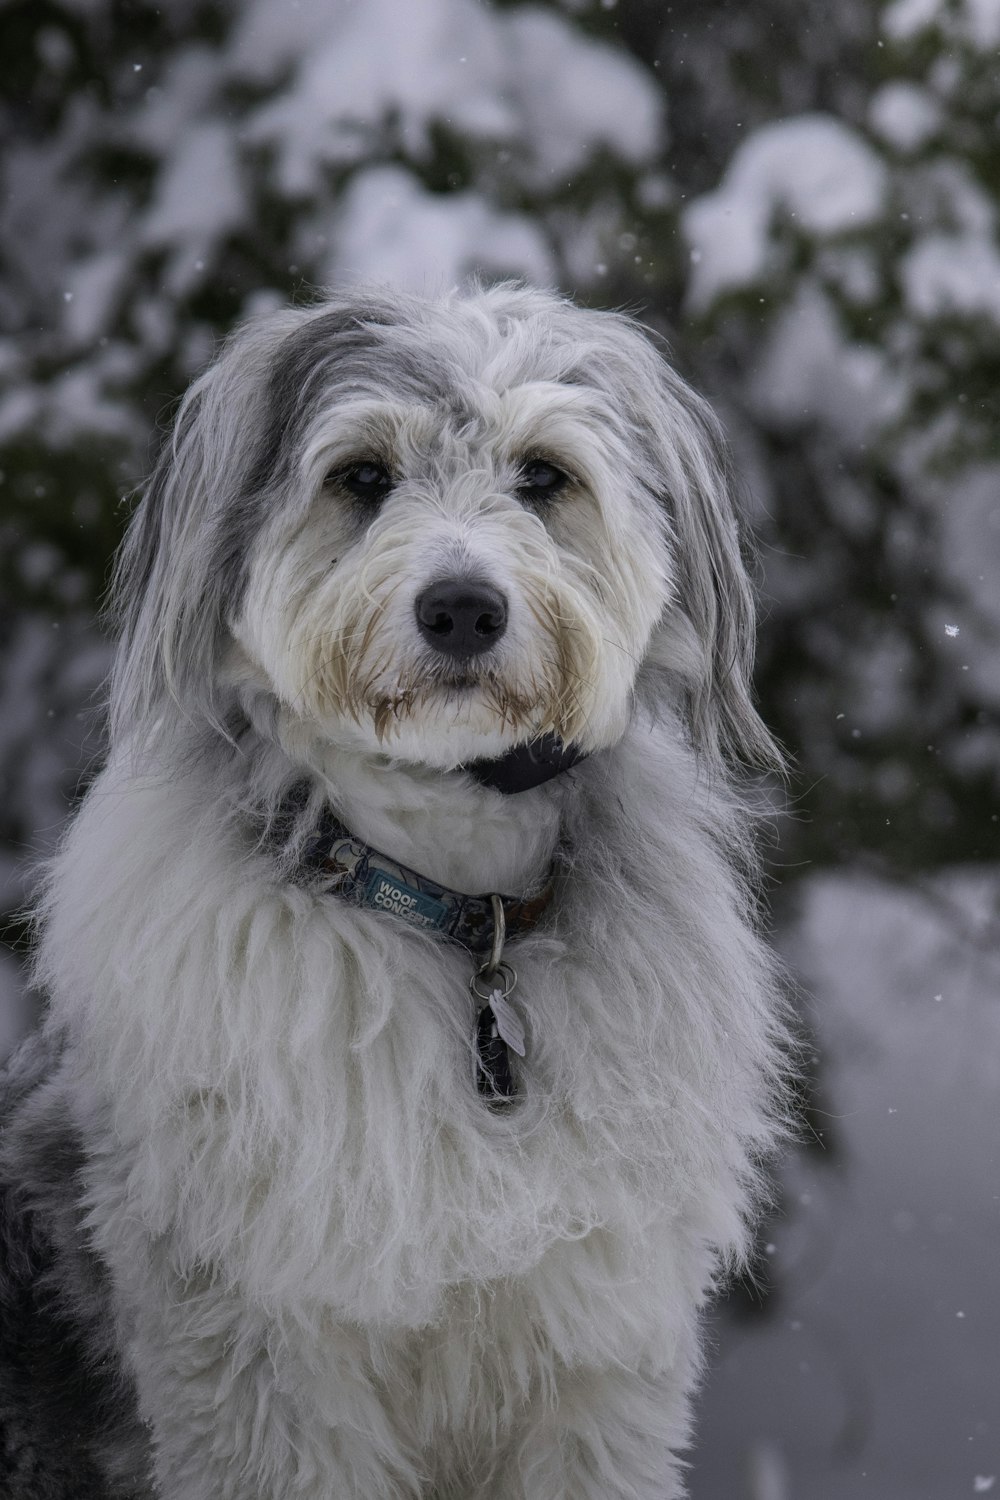 a shaggy white dog standing in the snow